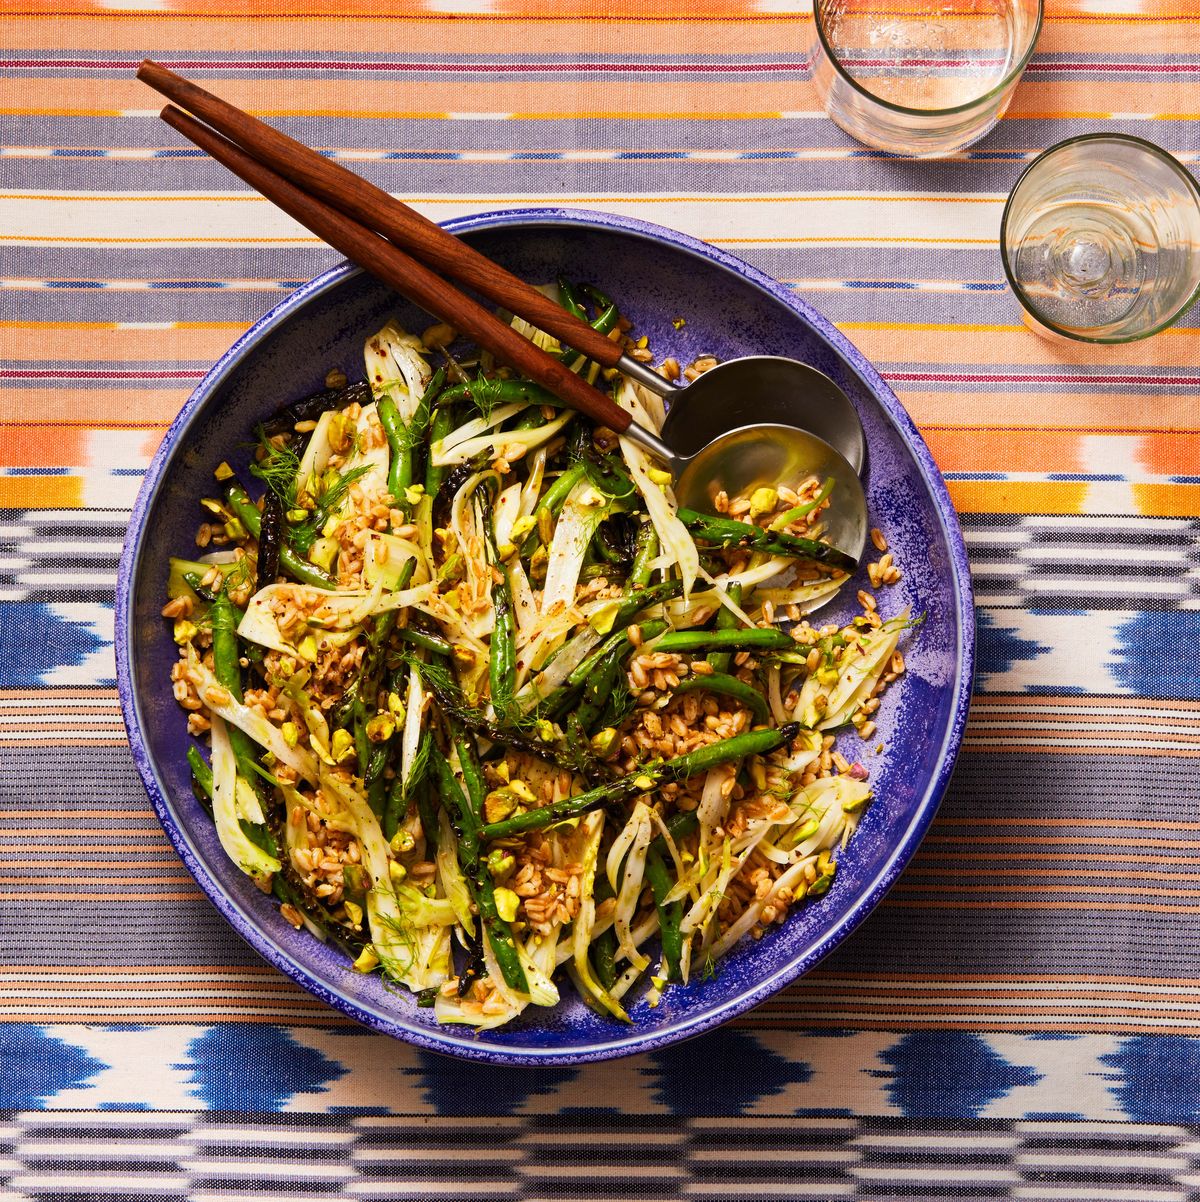 grilled green beans, fennel, and farro